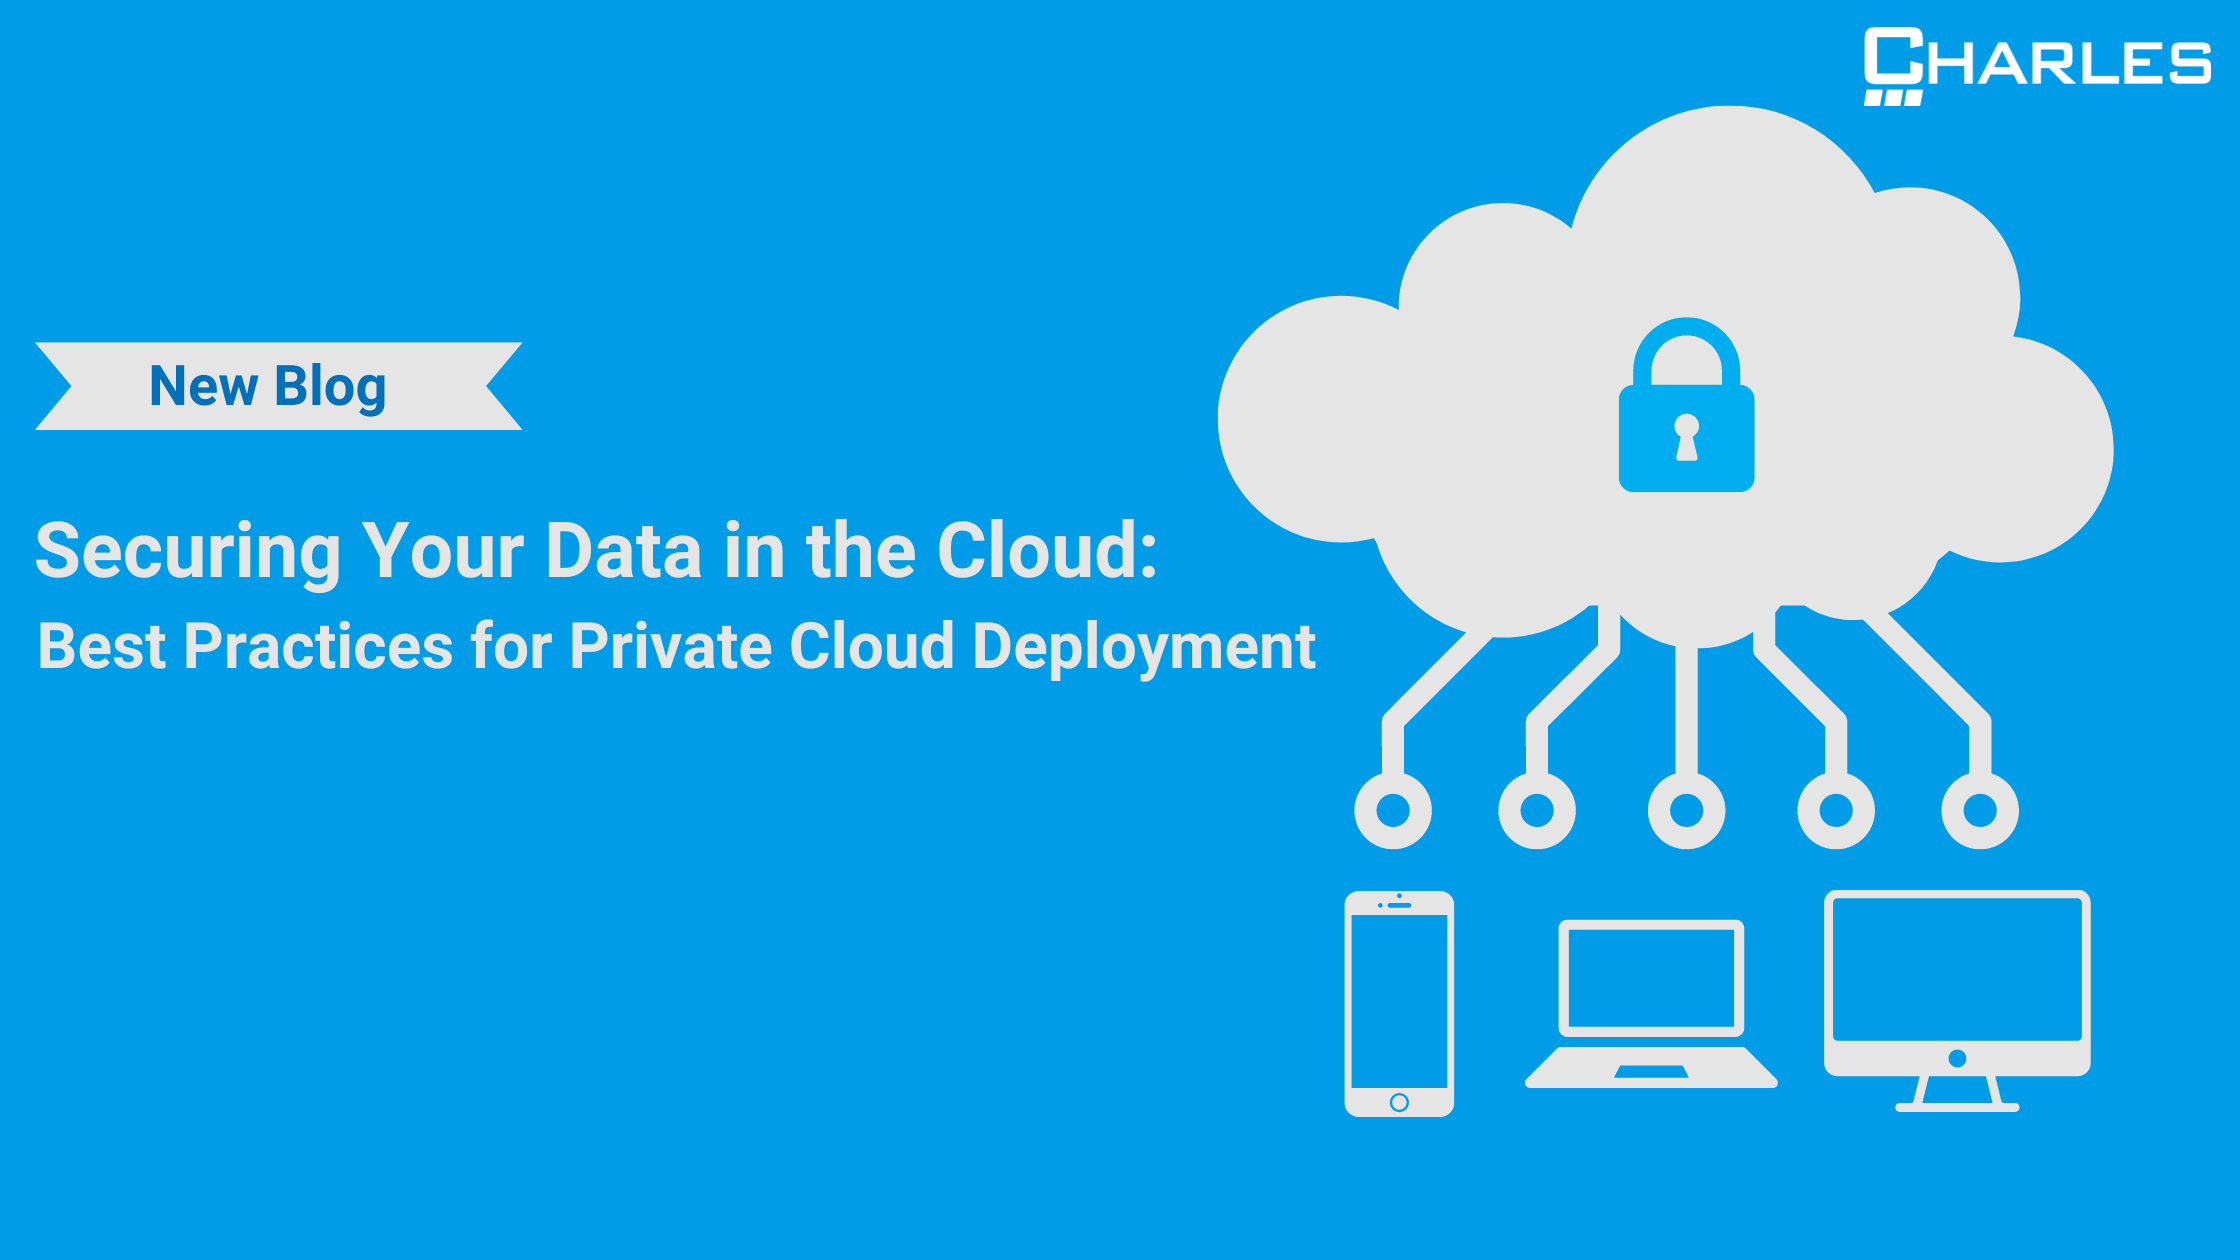 Securing Your Data in the Cloud: Best Practices for Private Cloud Deployment